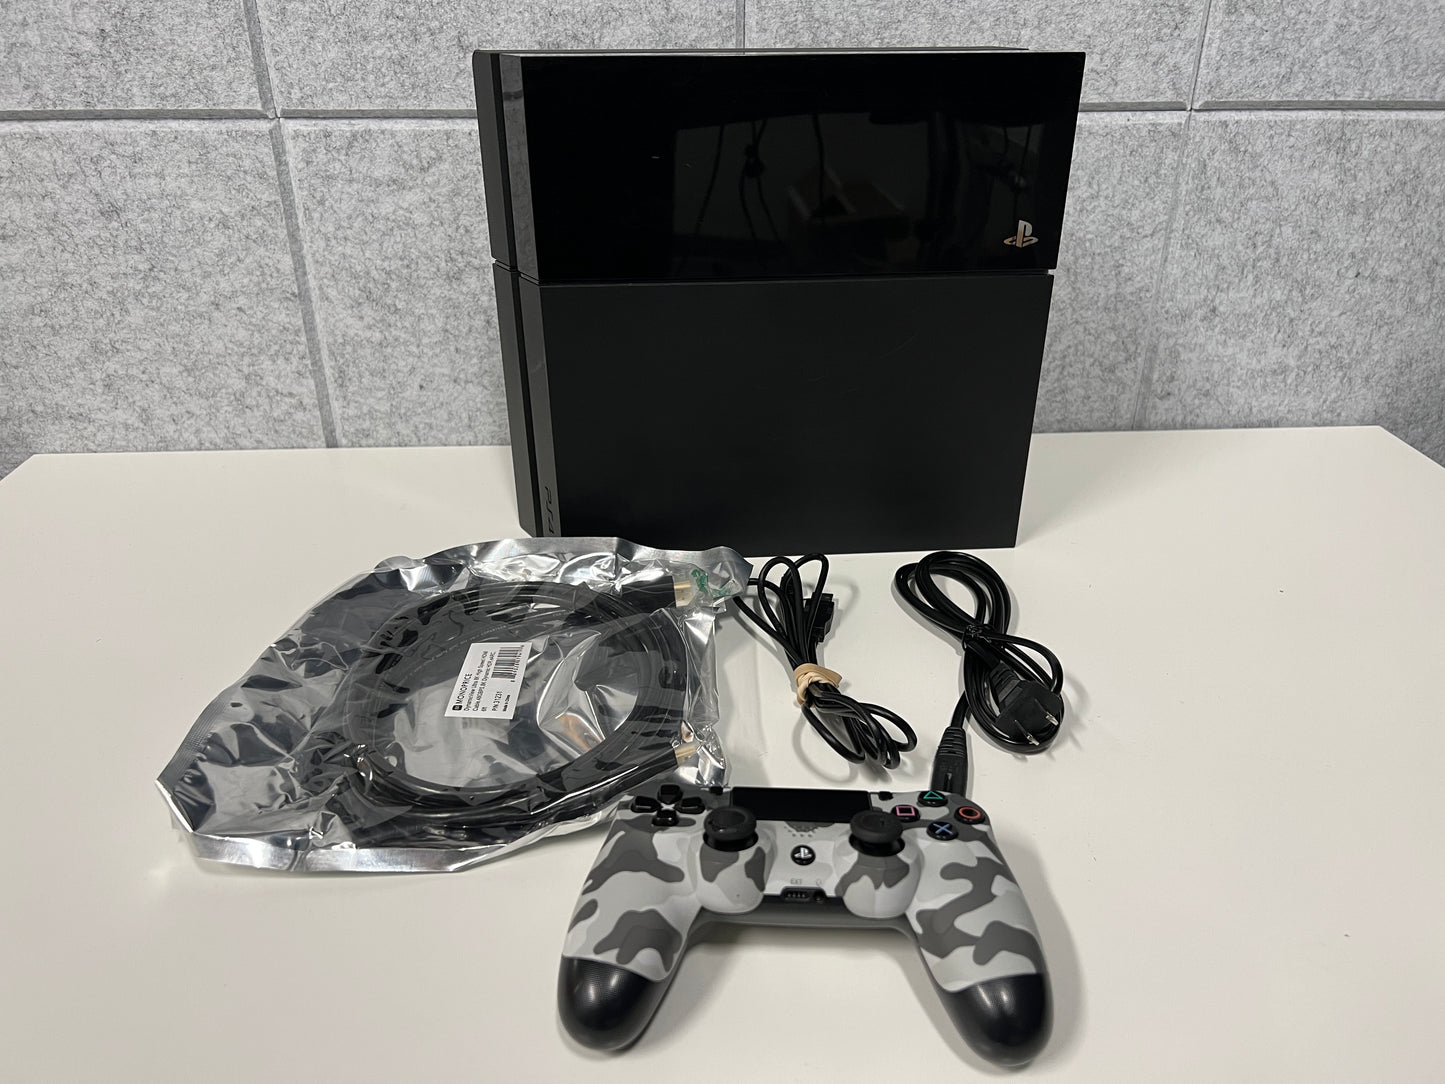 Sony 500GB PlayStation 4 PS4 Console w/ Controller & Cords (Used)